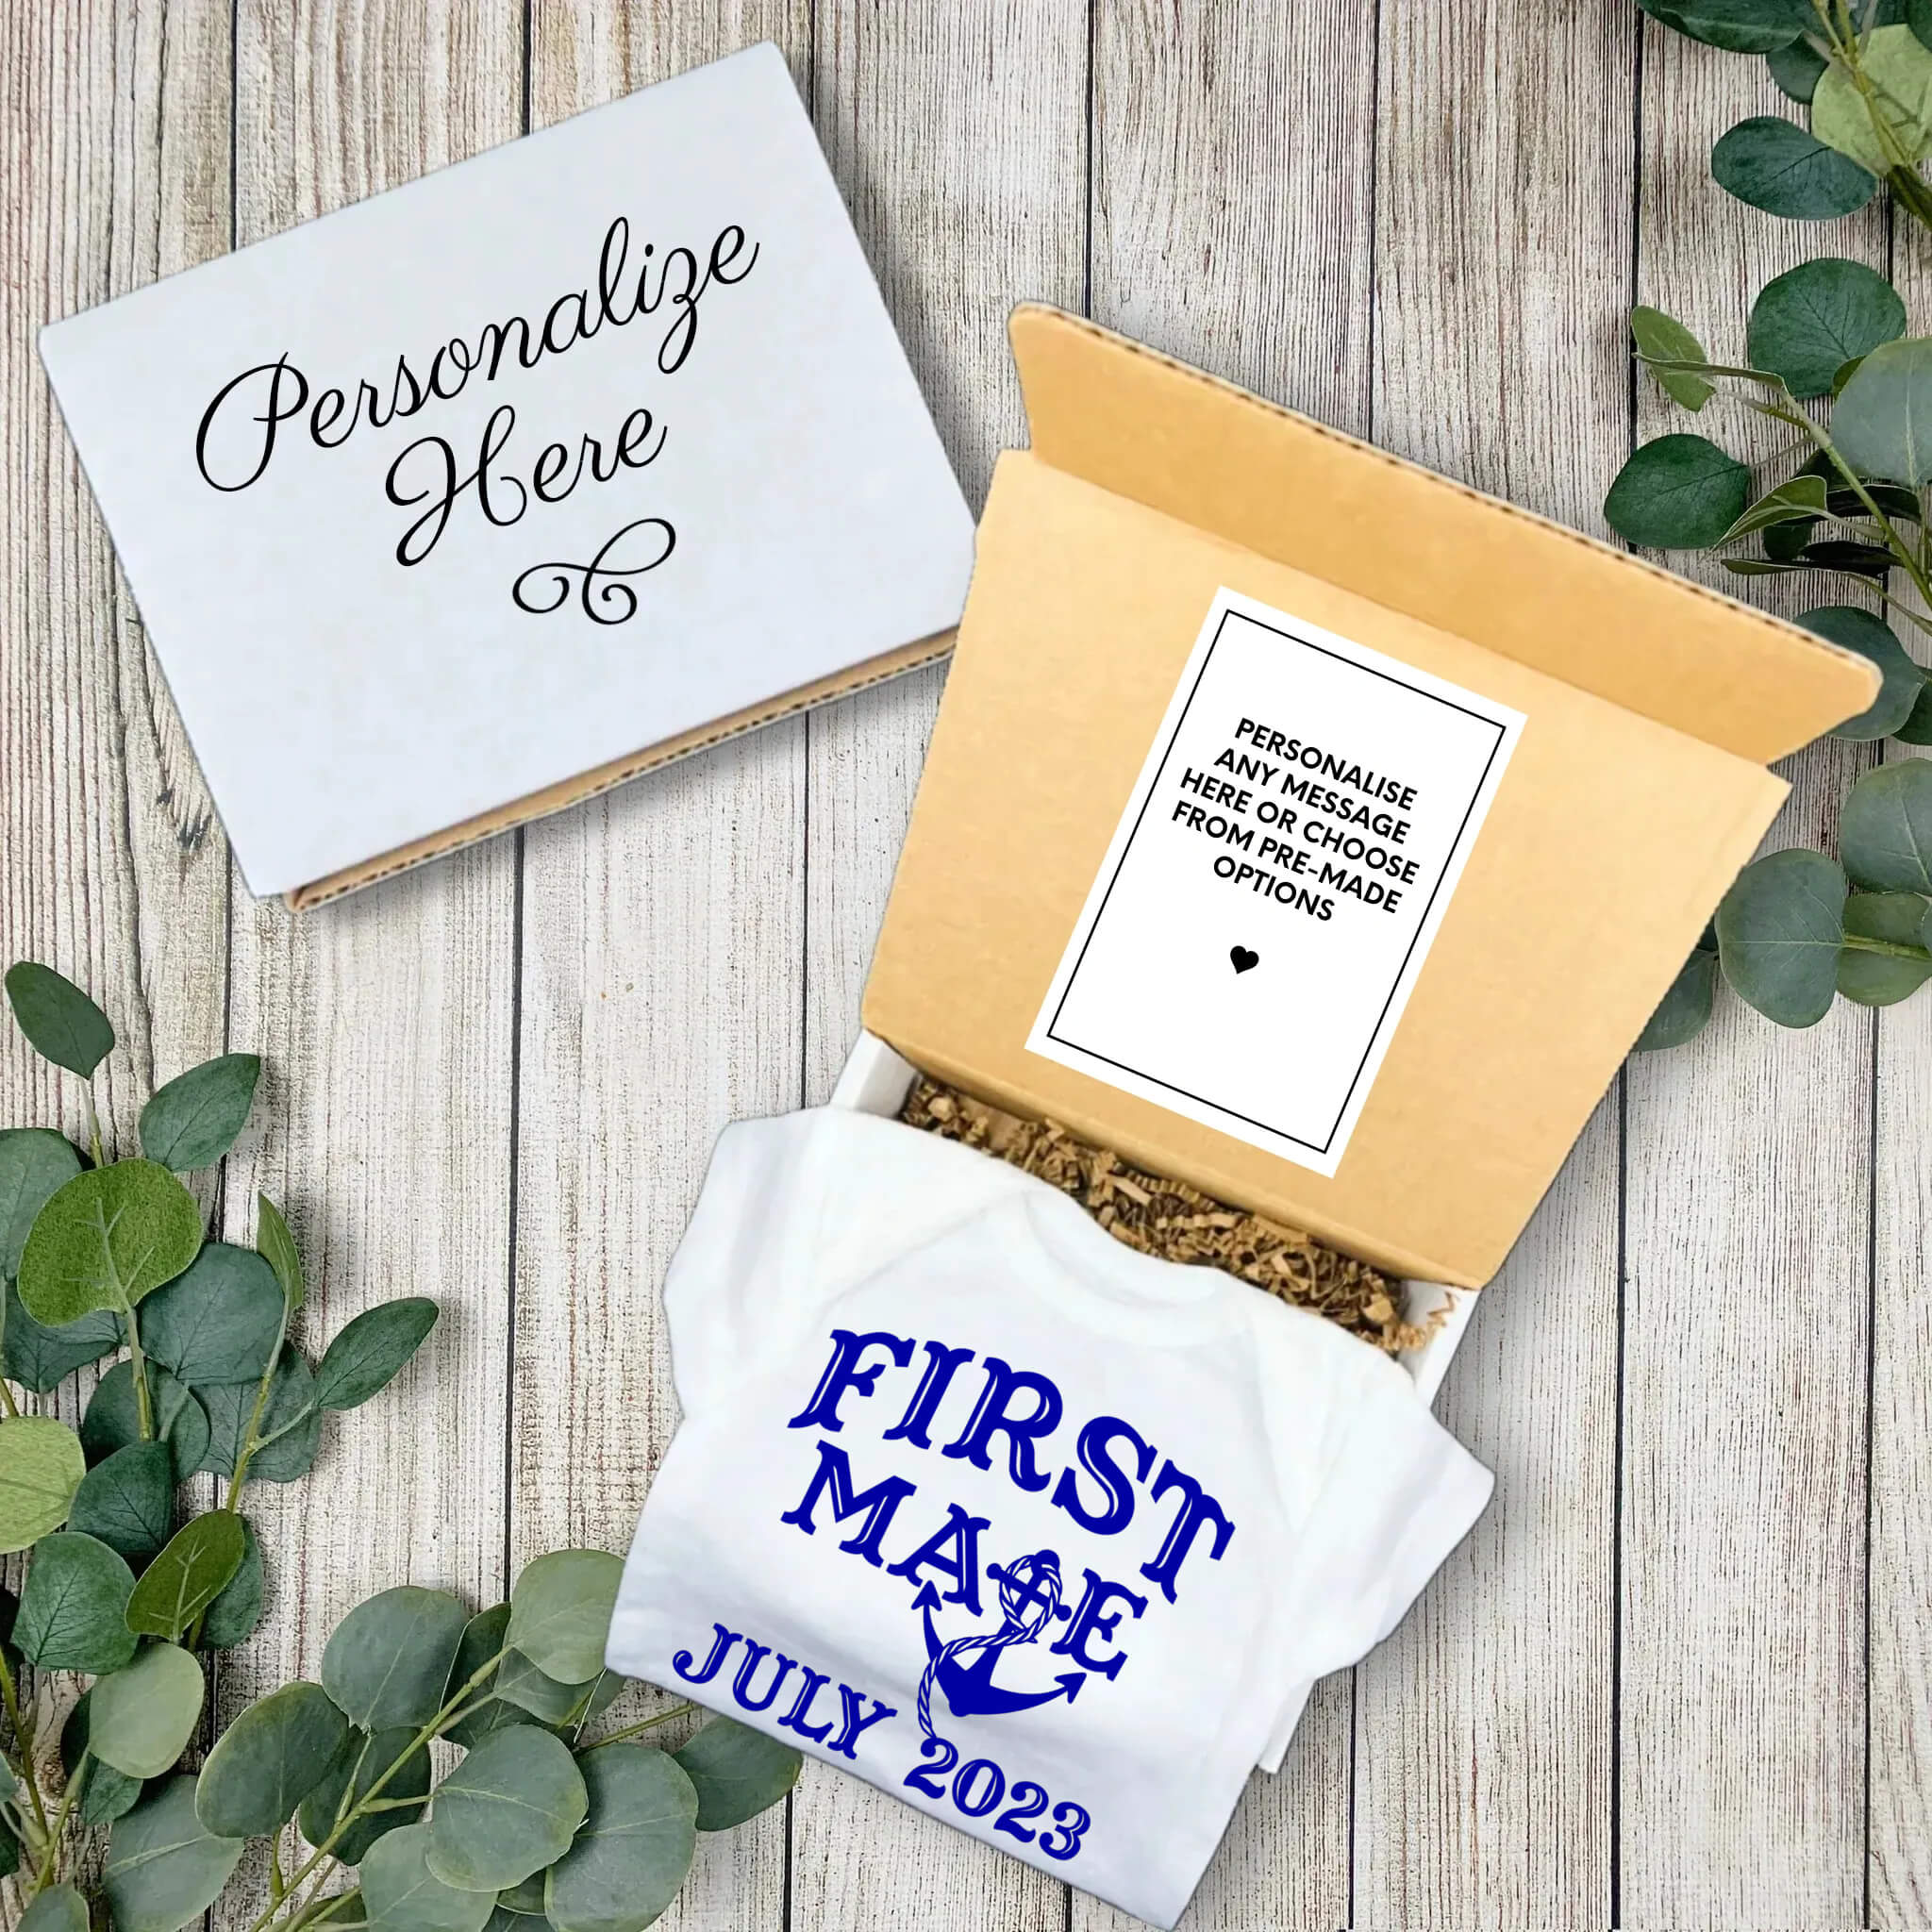 Personalized Pregnancy Announcement, First Mate, Dad, Grandma, Grandpa, Auntie, Uncle To Be, Sailboat Customized Baby Announcement Onesie, Summer, Sailing Season Onesie Gift Box